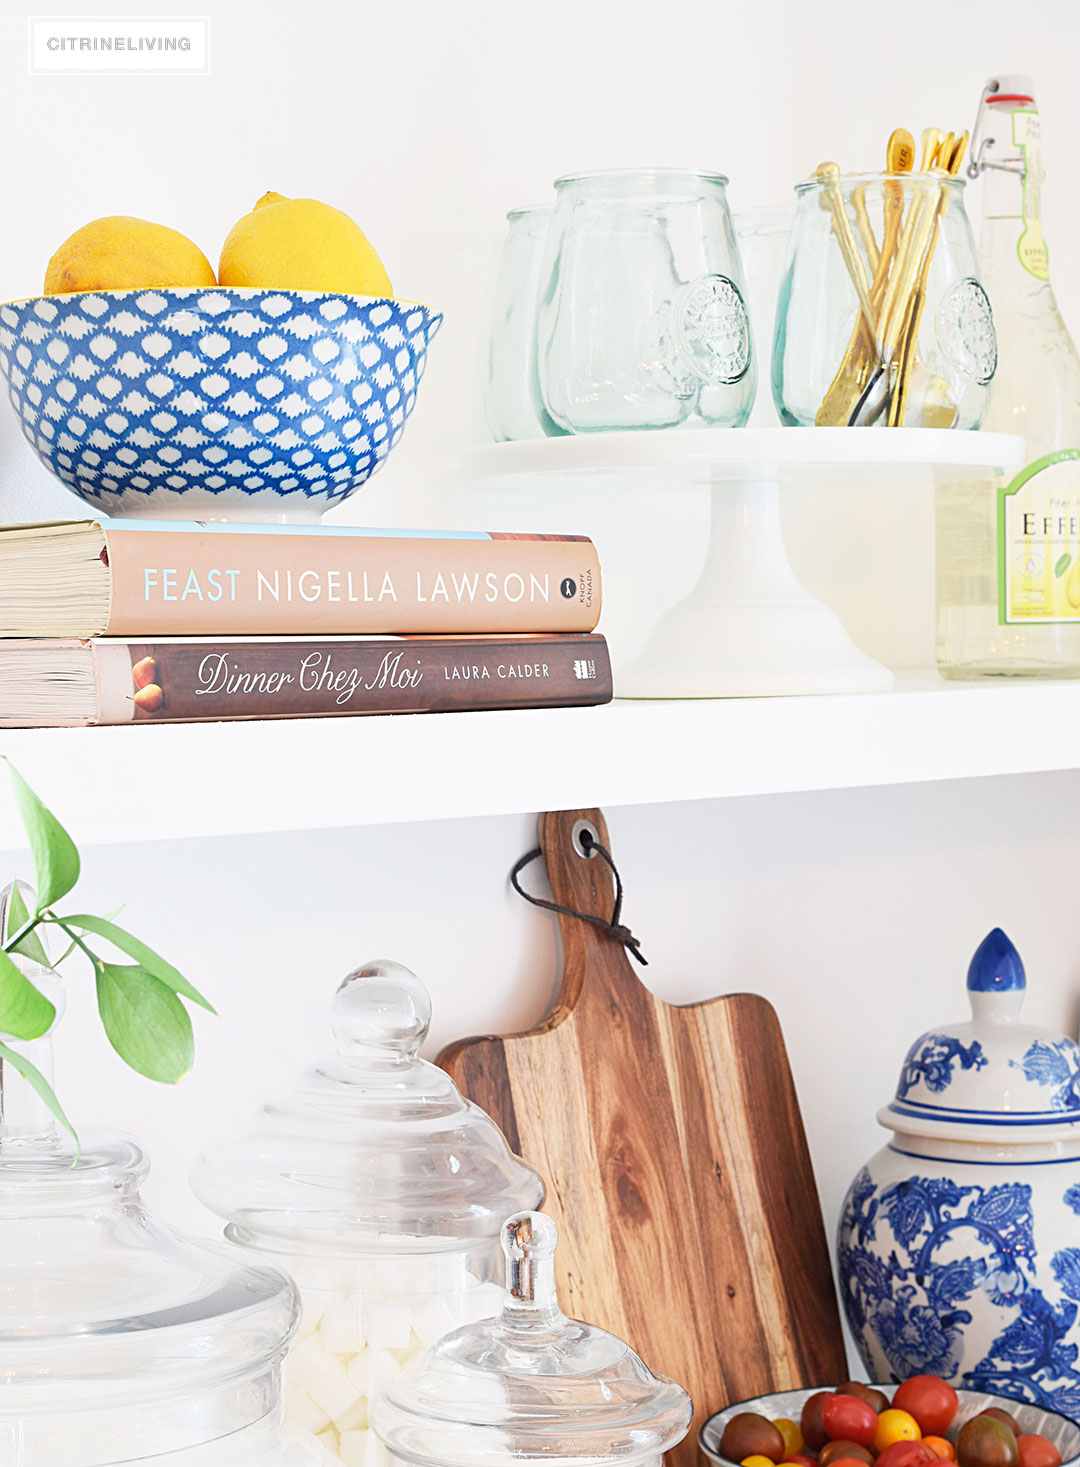 Create a curated, collected, artisanal look on your kitchen shelves with a mix of cookbooks, wood, glass, blue and white, and gourmet inspired accents.